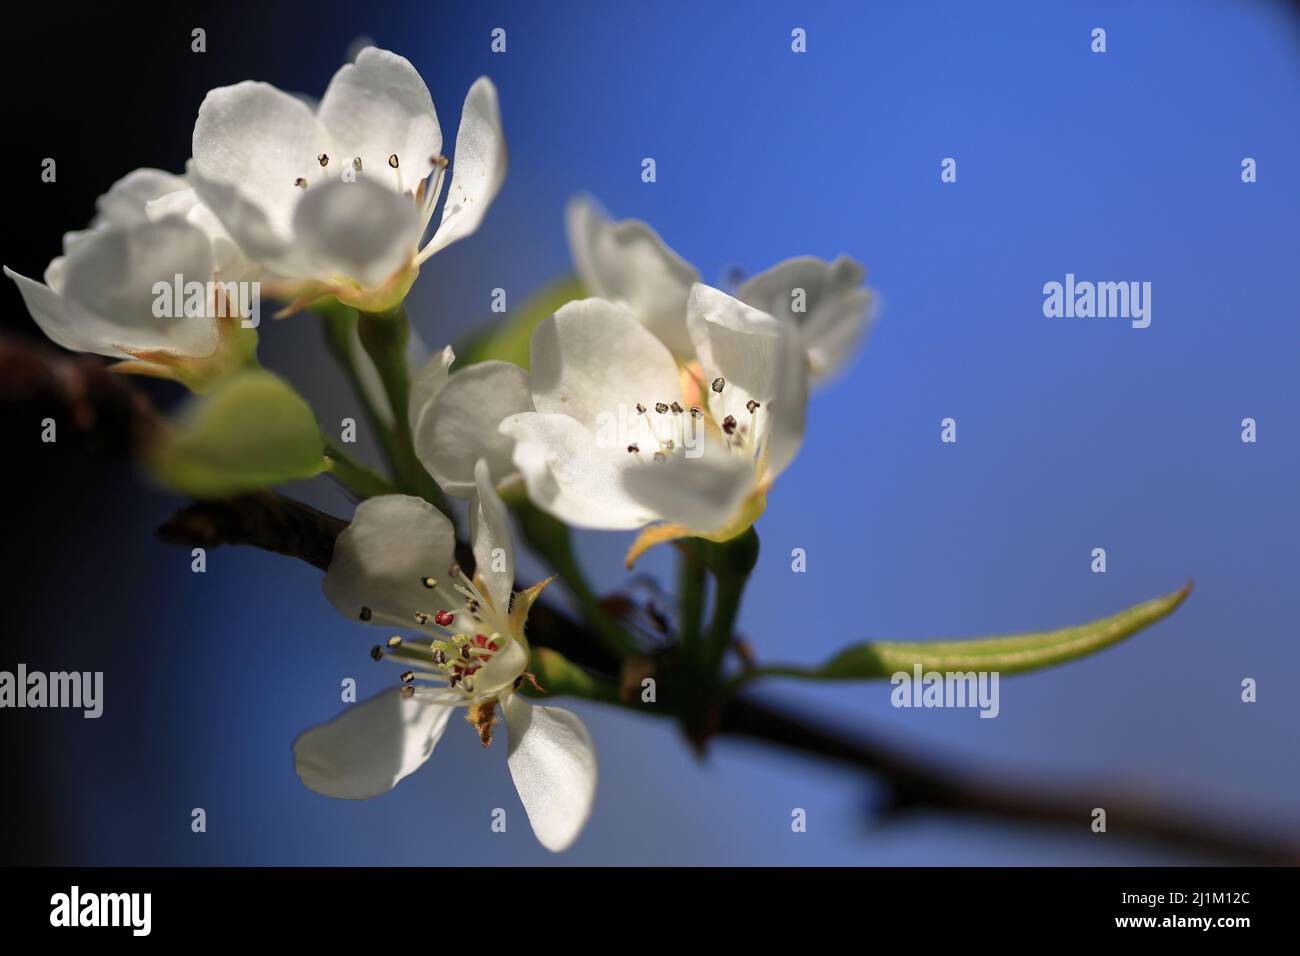 Pear tree blossom flowers with pollen covered stamen against a deep blue sky Stock Photo